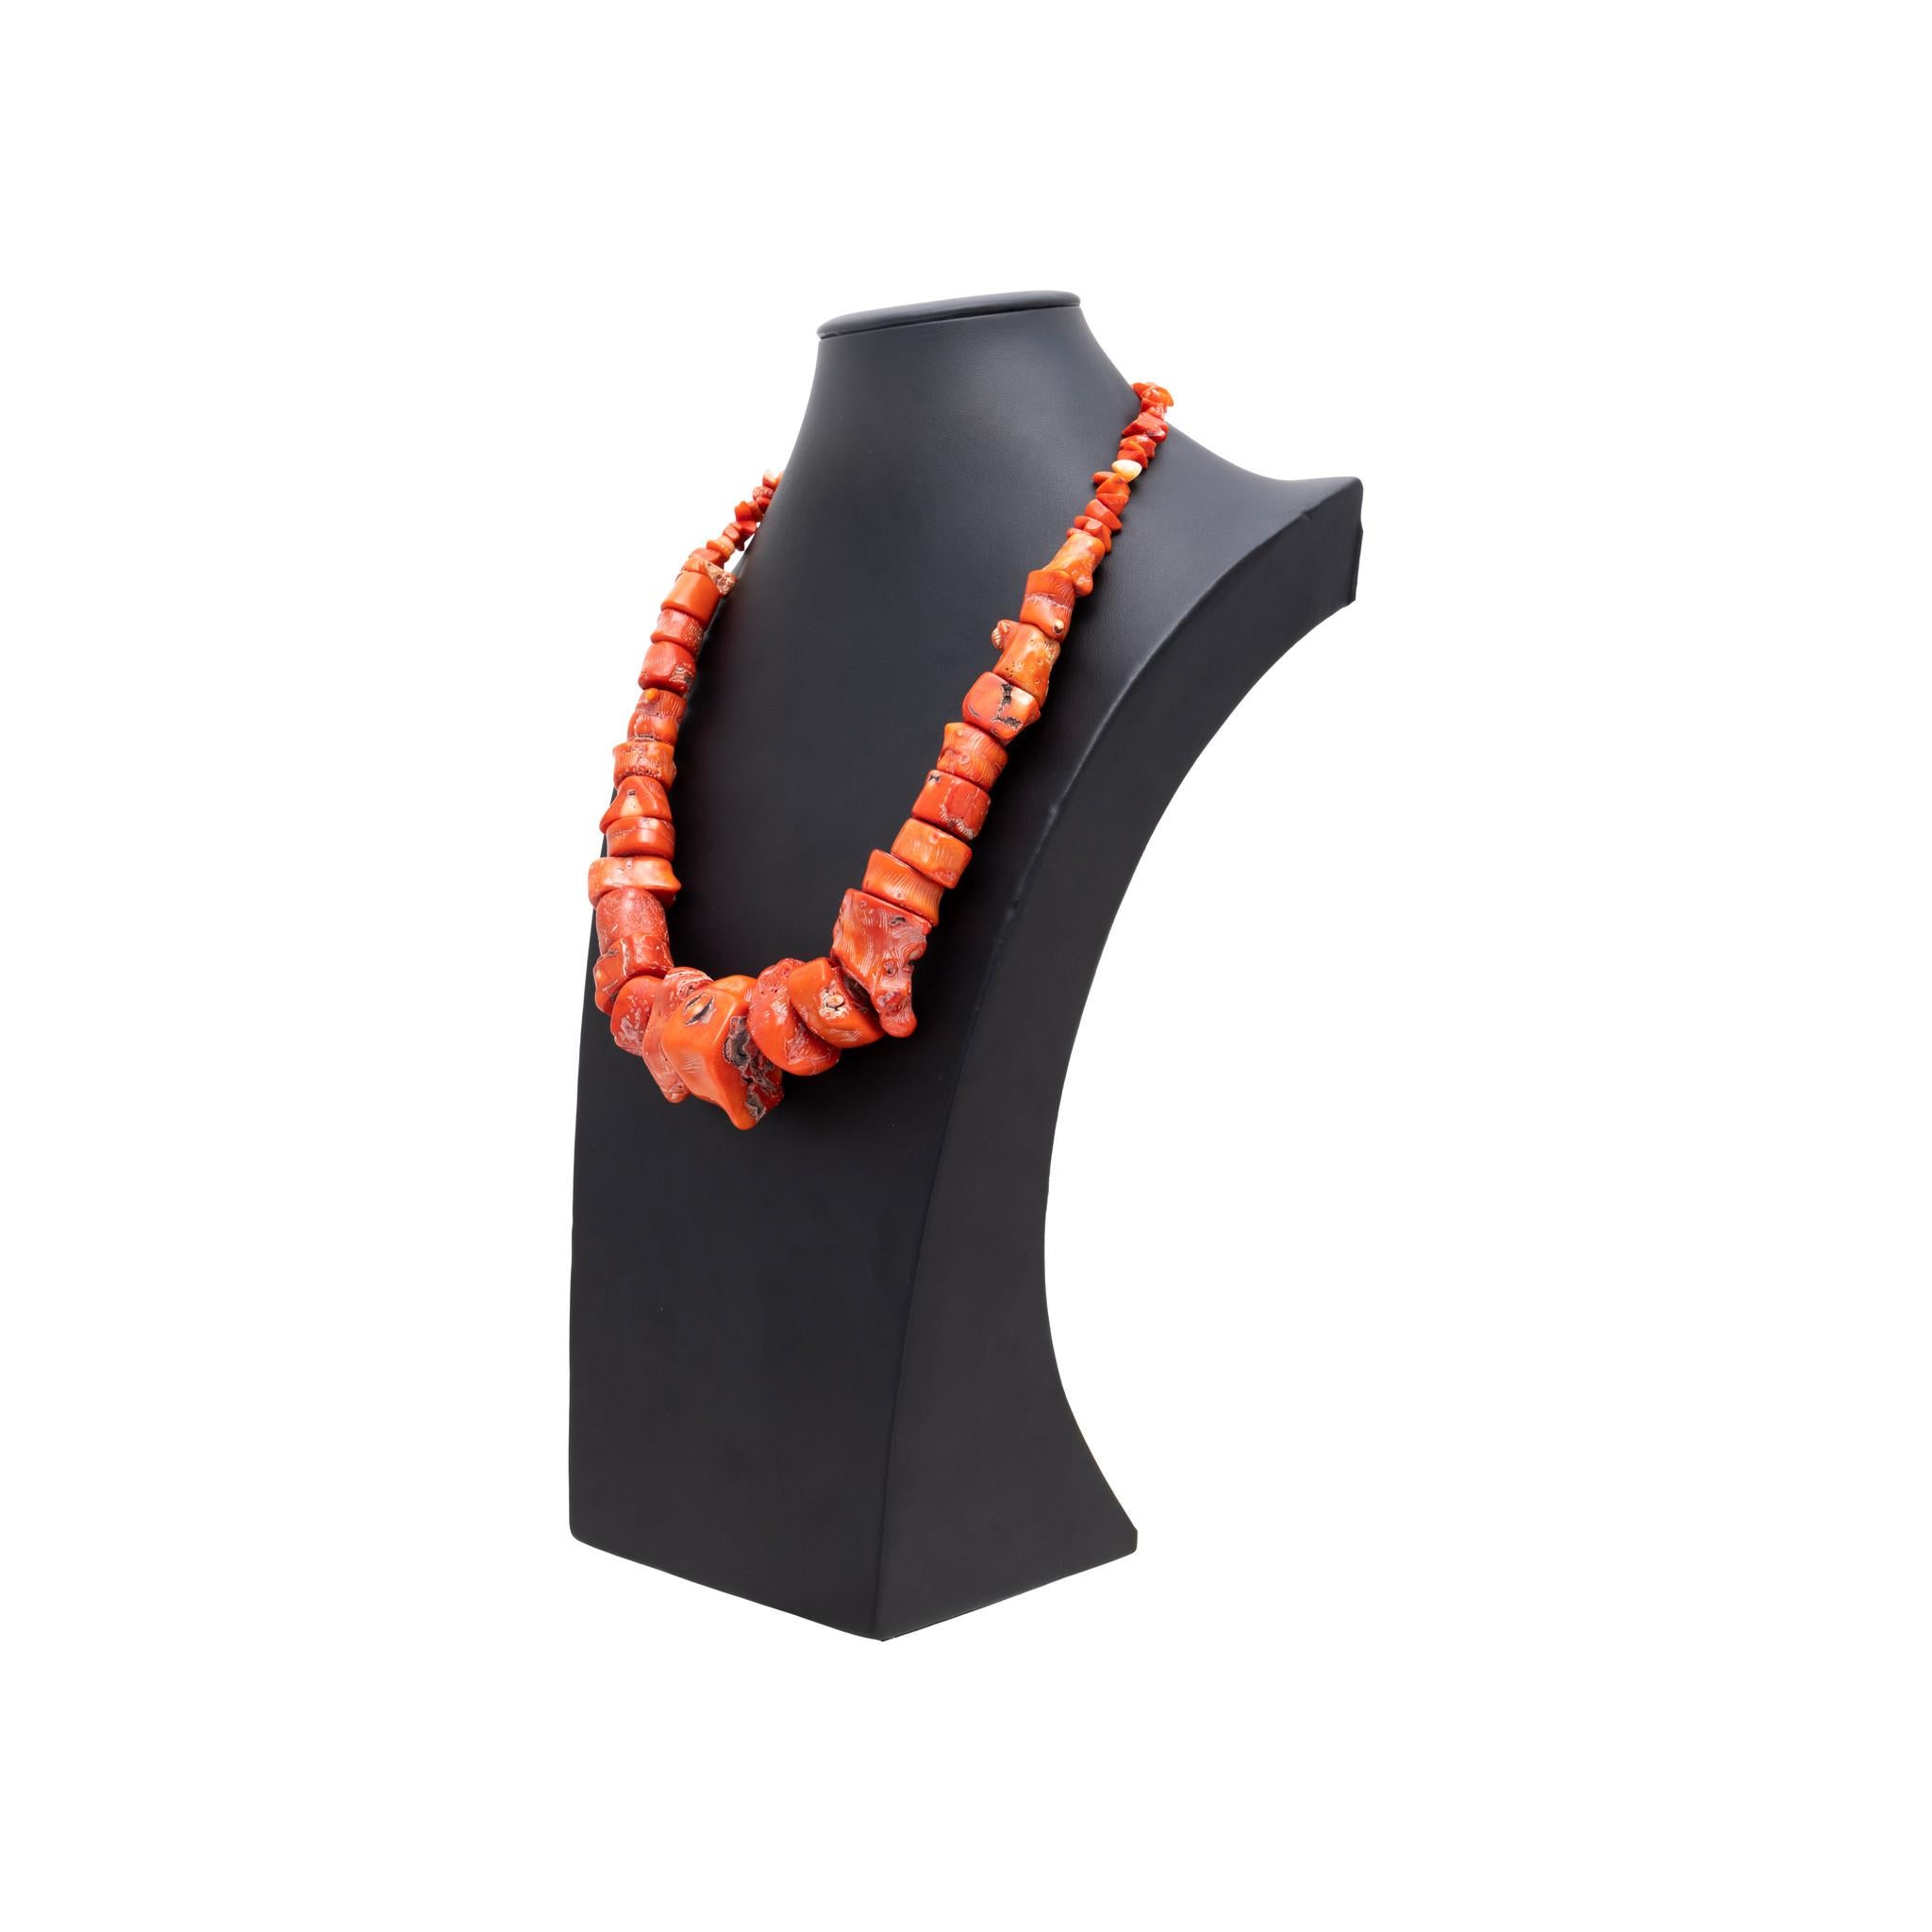 Beaded necklace with exceptionally large gradient size coral beads. Largest stone is over 1 inch across! Coral is natural, with semi-smooth beads that still retain the 